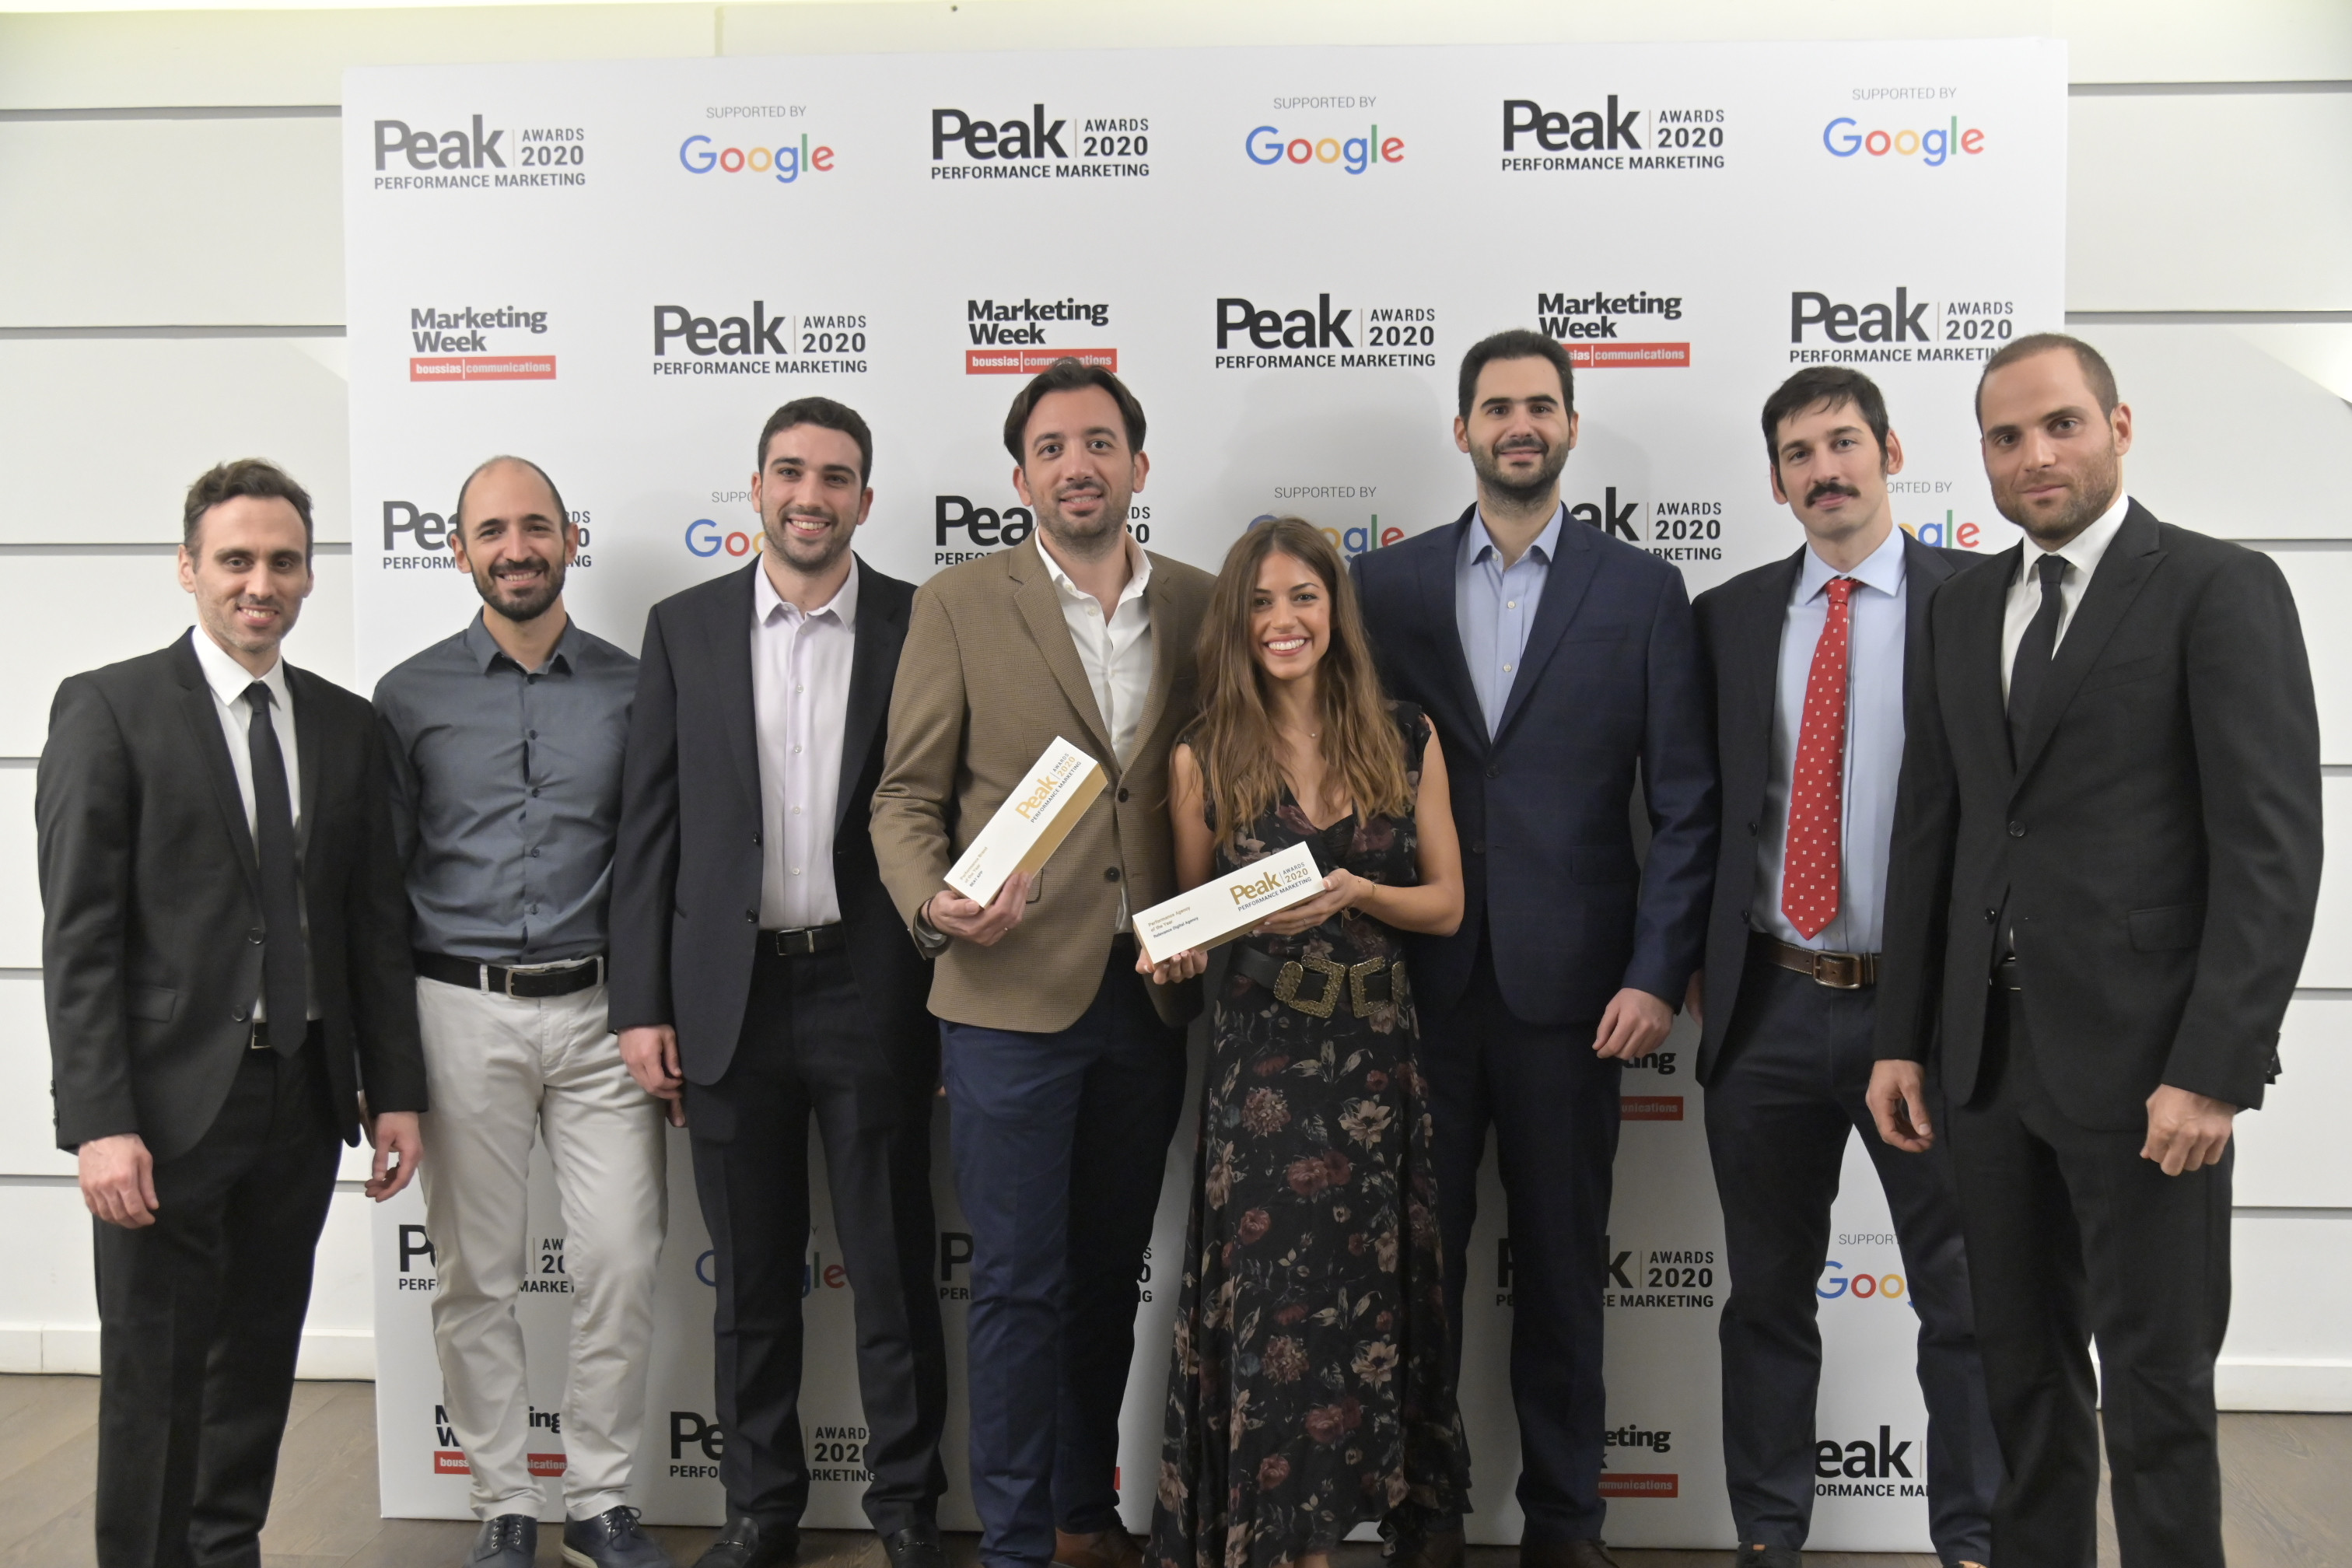 ''Team Relevance has been named Performance Marketing Agency of the year 2020 and received 41 PEAK Awards''